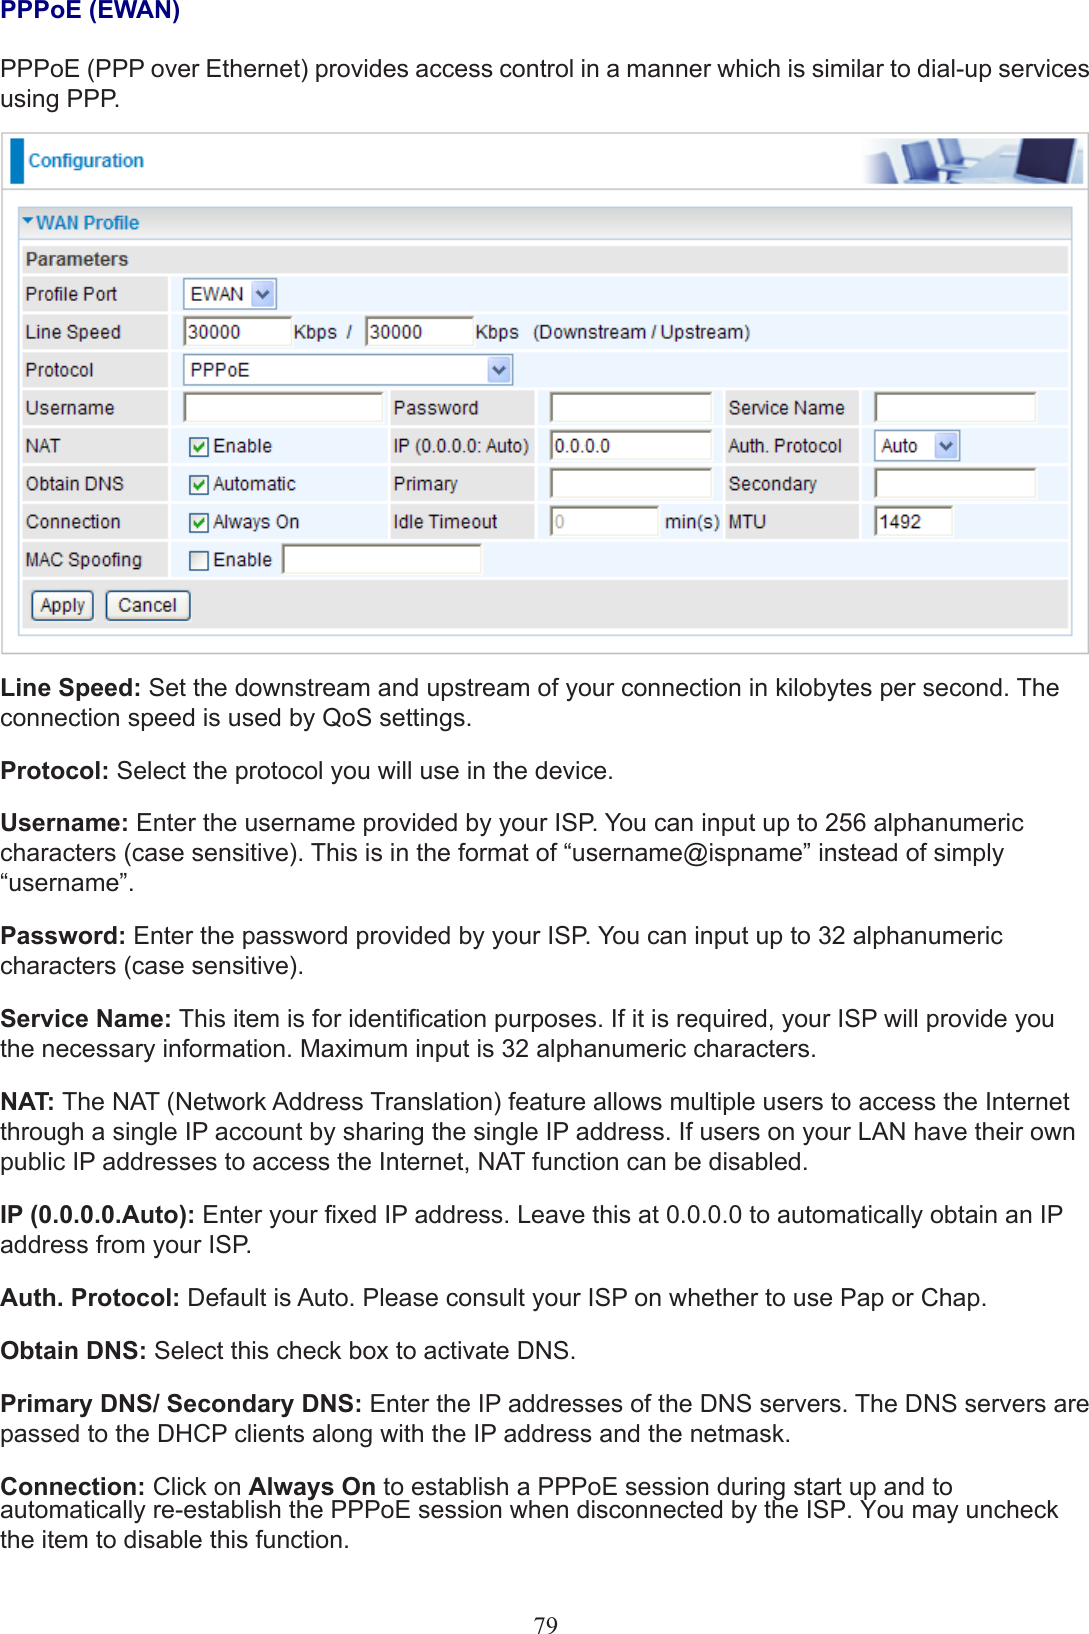 79PPPoE (EWAN)PPPoE (PPP over Ethernet) provides access control in a manner which is similar to dial-up services using PPP.Line Speed: Set the downstream and upstream of your connection in kilobytes per second. The connection speed is used by QoS settings.Protocol: Select the protocol you will use in the device.Username: Enter the username provided by your ISP. You can input up to 256 alphanumeric characters (case sensitive). This is in the format of “username@ispname” instead of simply “username”.Password: Enter the password provided by your ISP. You can input up to 32 alphanumeric characters (case sensitive).Service Name: This item is for identication purposes. If it is required, your ISP will provide you the necessary information. Maximum input is 32 alphanumeric characters.NAT: The NAT (Network Address Translation) feature allows multiple users to access the Internet through a single IP account by sharing the single IP address. If users on your LAN have their own public IP addresses to access the Internet, NAT function can be disabled.IP (0.0.0.0.Auto): Enter your xed IP address. Leave this at 0.0.0.0 to automatically obtain an IP address from your ISP.Auth. Protocol: Default is Auto. Please consult your ISP on whether to use Pap or Chap.Obtain DNS: Select this check box to activate DNS.Primary DNS/ Secondary DNS: Enter the IP addresses of the DNS servers. The DNS servers are passed to the DHCP clients along with the IP address and the netmask.Connection: Click on Always On to establish a PPPoE session during start up and to automatically re-establish the PPPoE session when disconnected by the ISP. You may uncheck the item to disable this function. 